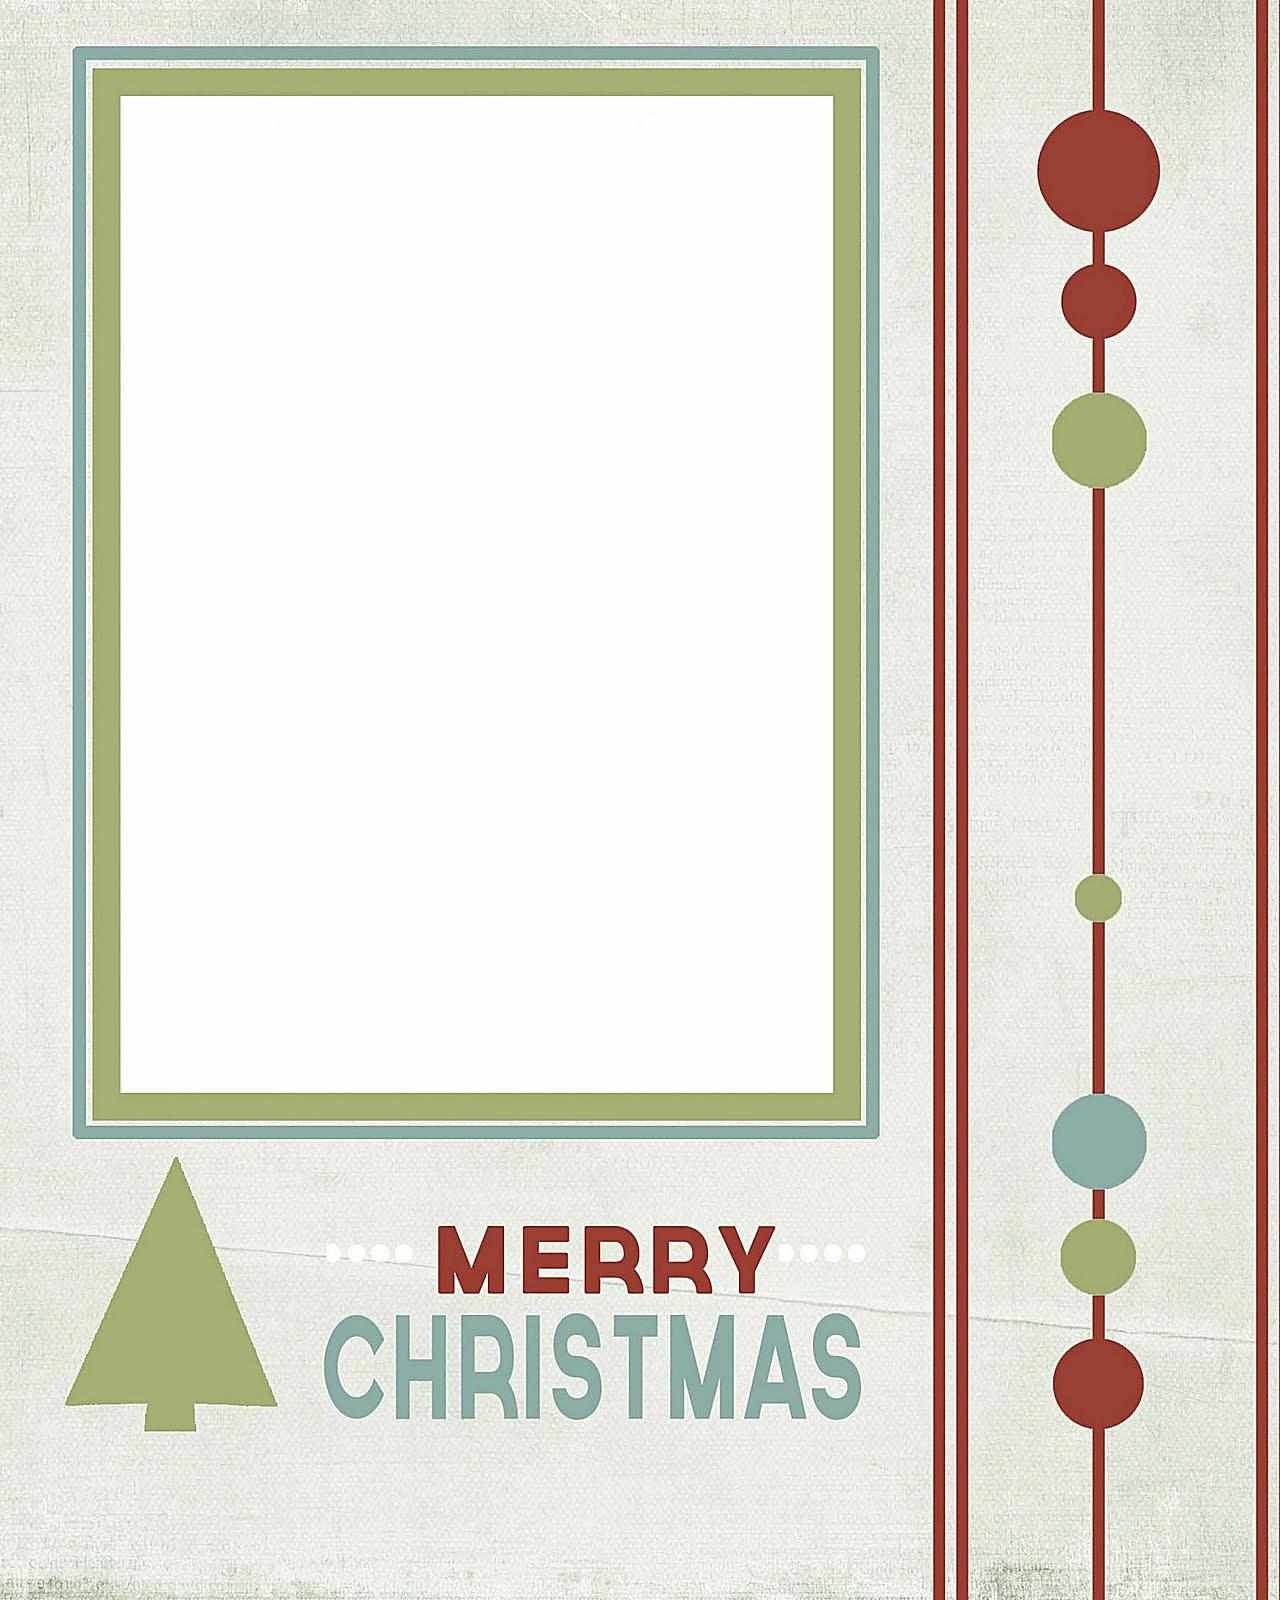 10 Free Templates For Christmas Photo Cards - Create Your Own Free Printable Christmas Cards